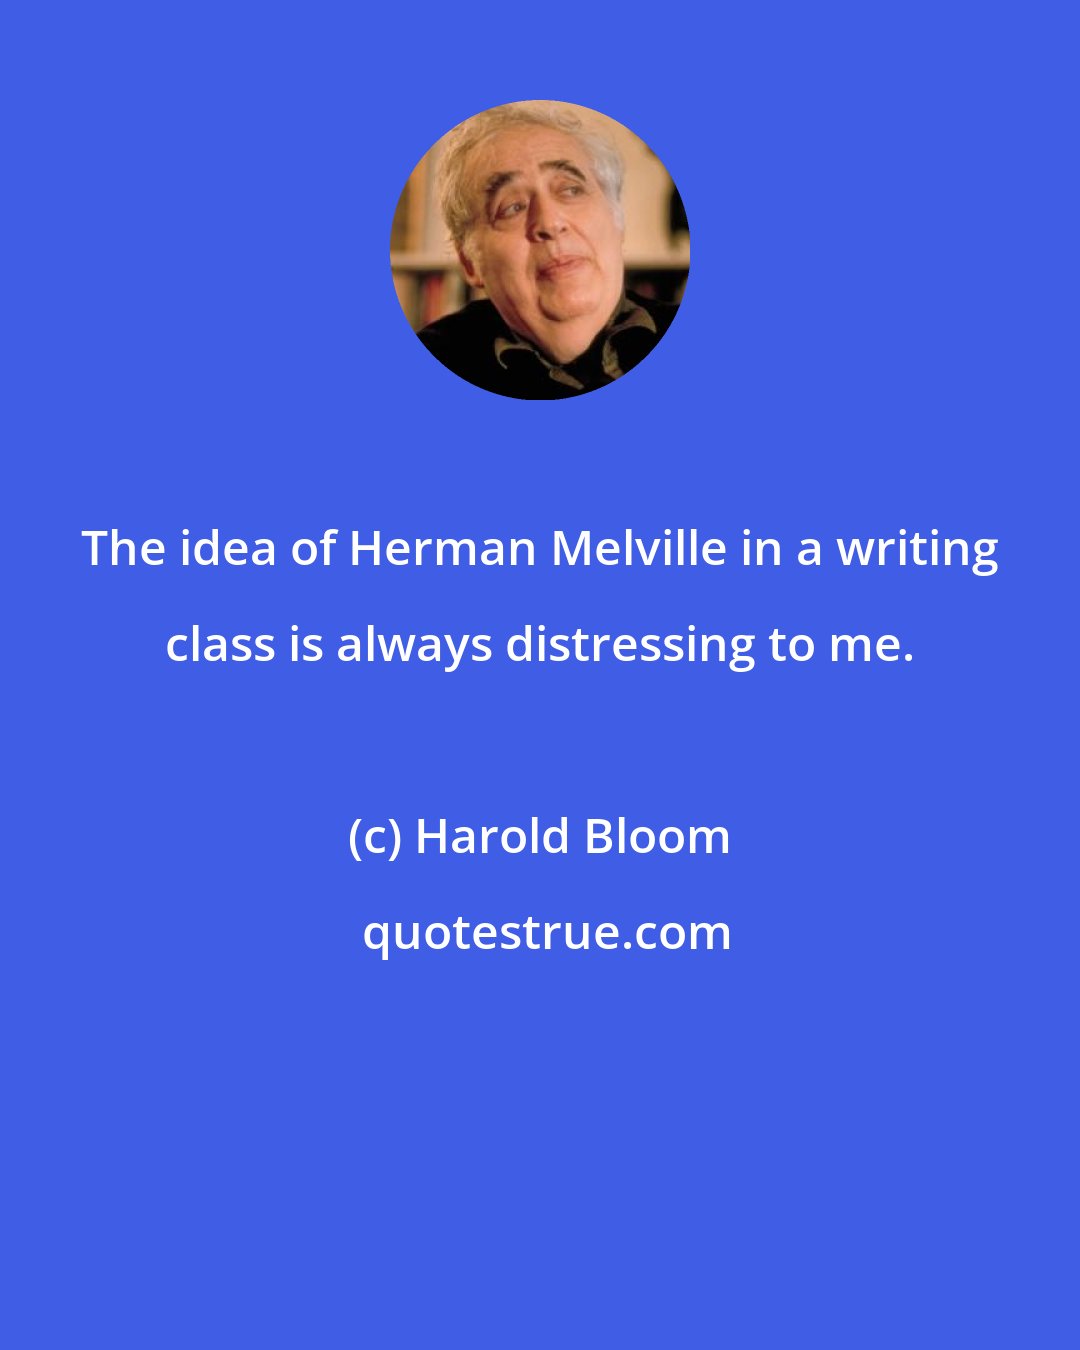 Harold Bloom: The idea of Herman Melville in a writing class is always distressing to me.